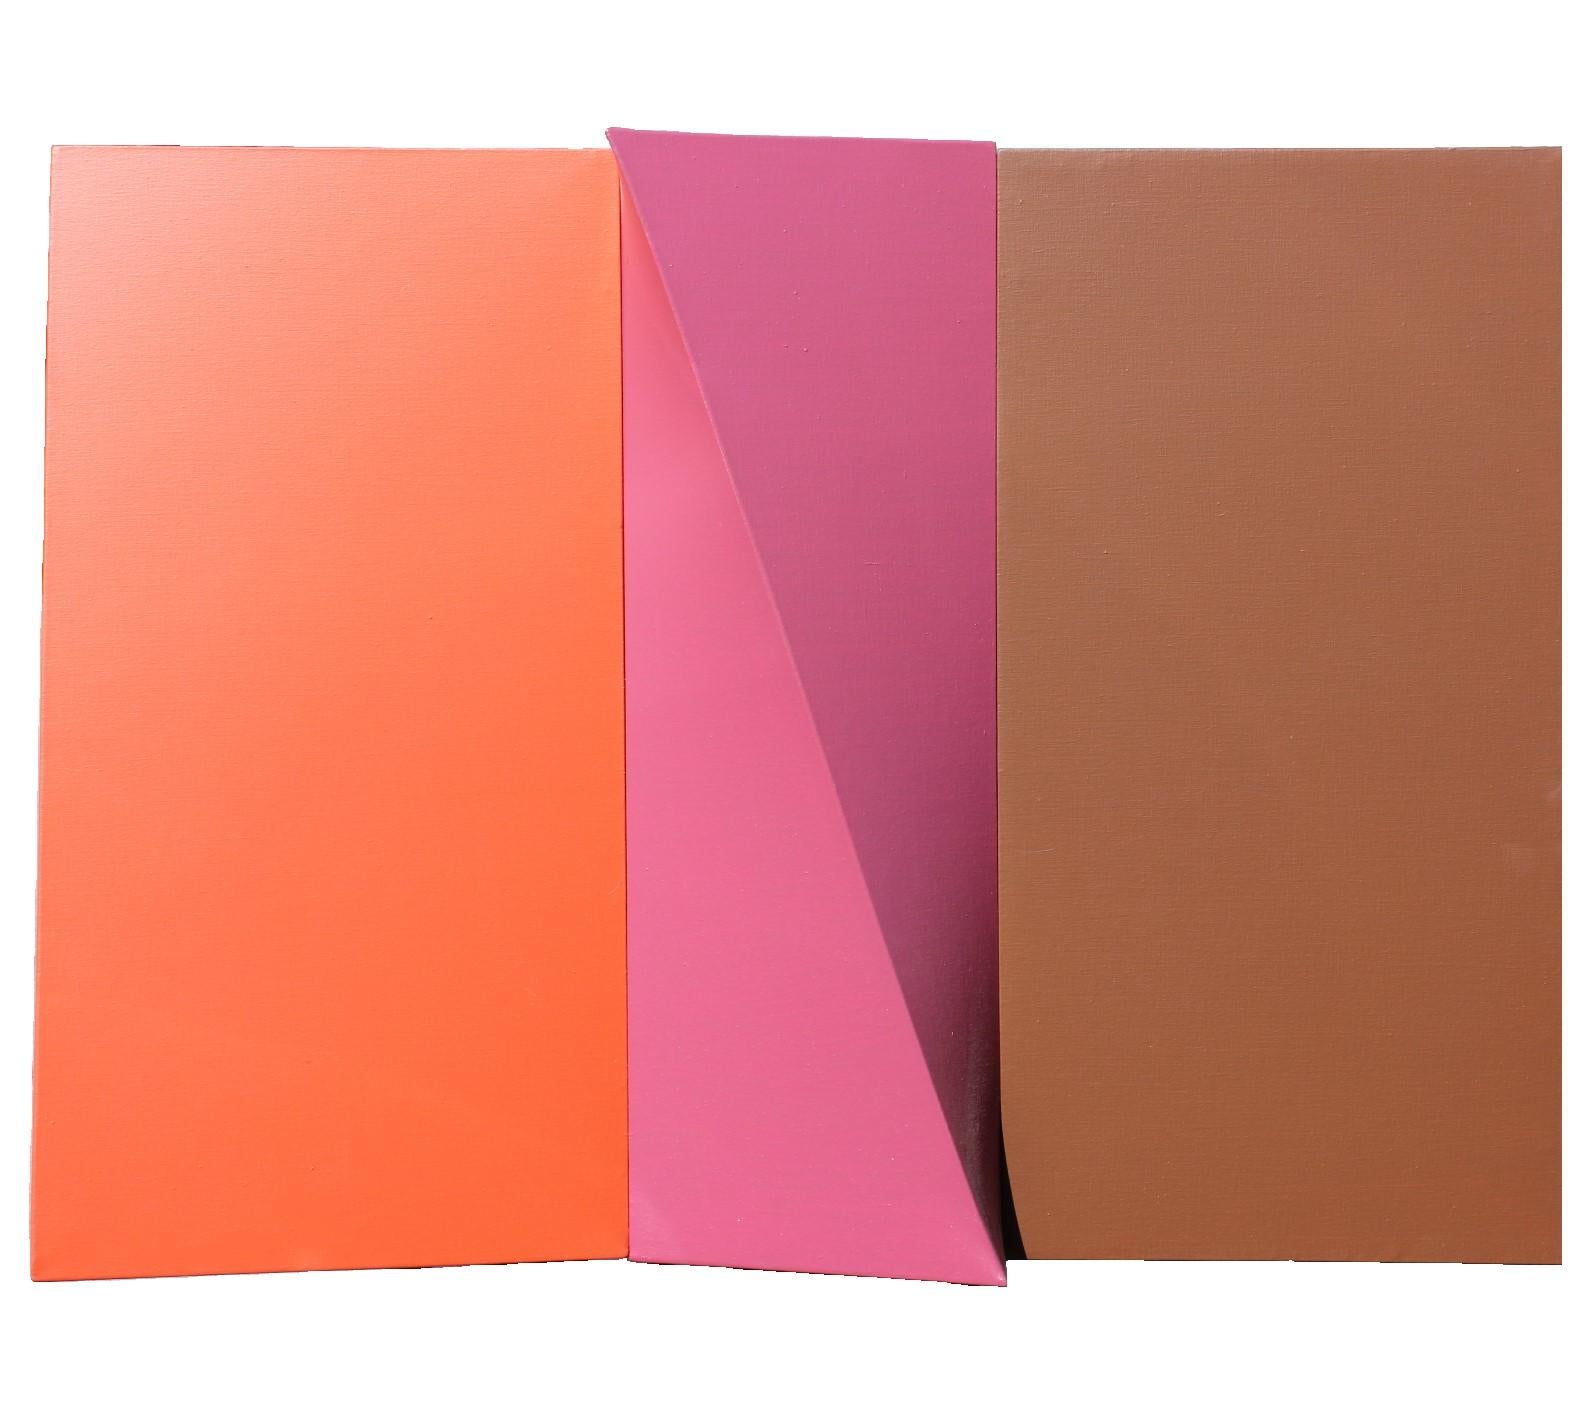 Gary Jurysta Abstract Painting - "Slice" Orange, Pink, and Light Brown Wall Sculpture